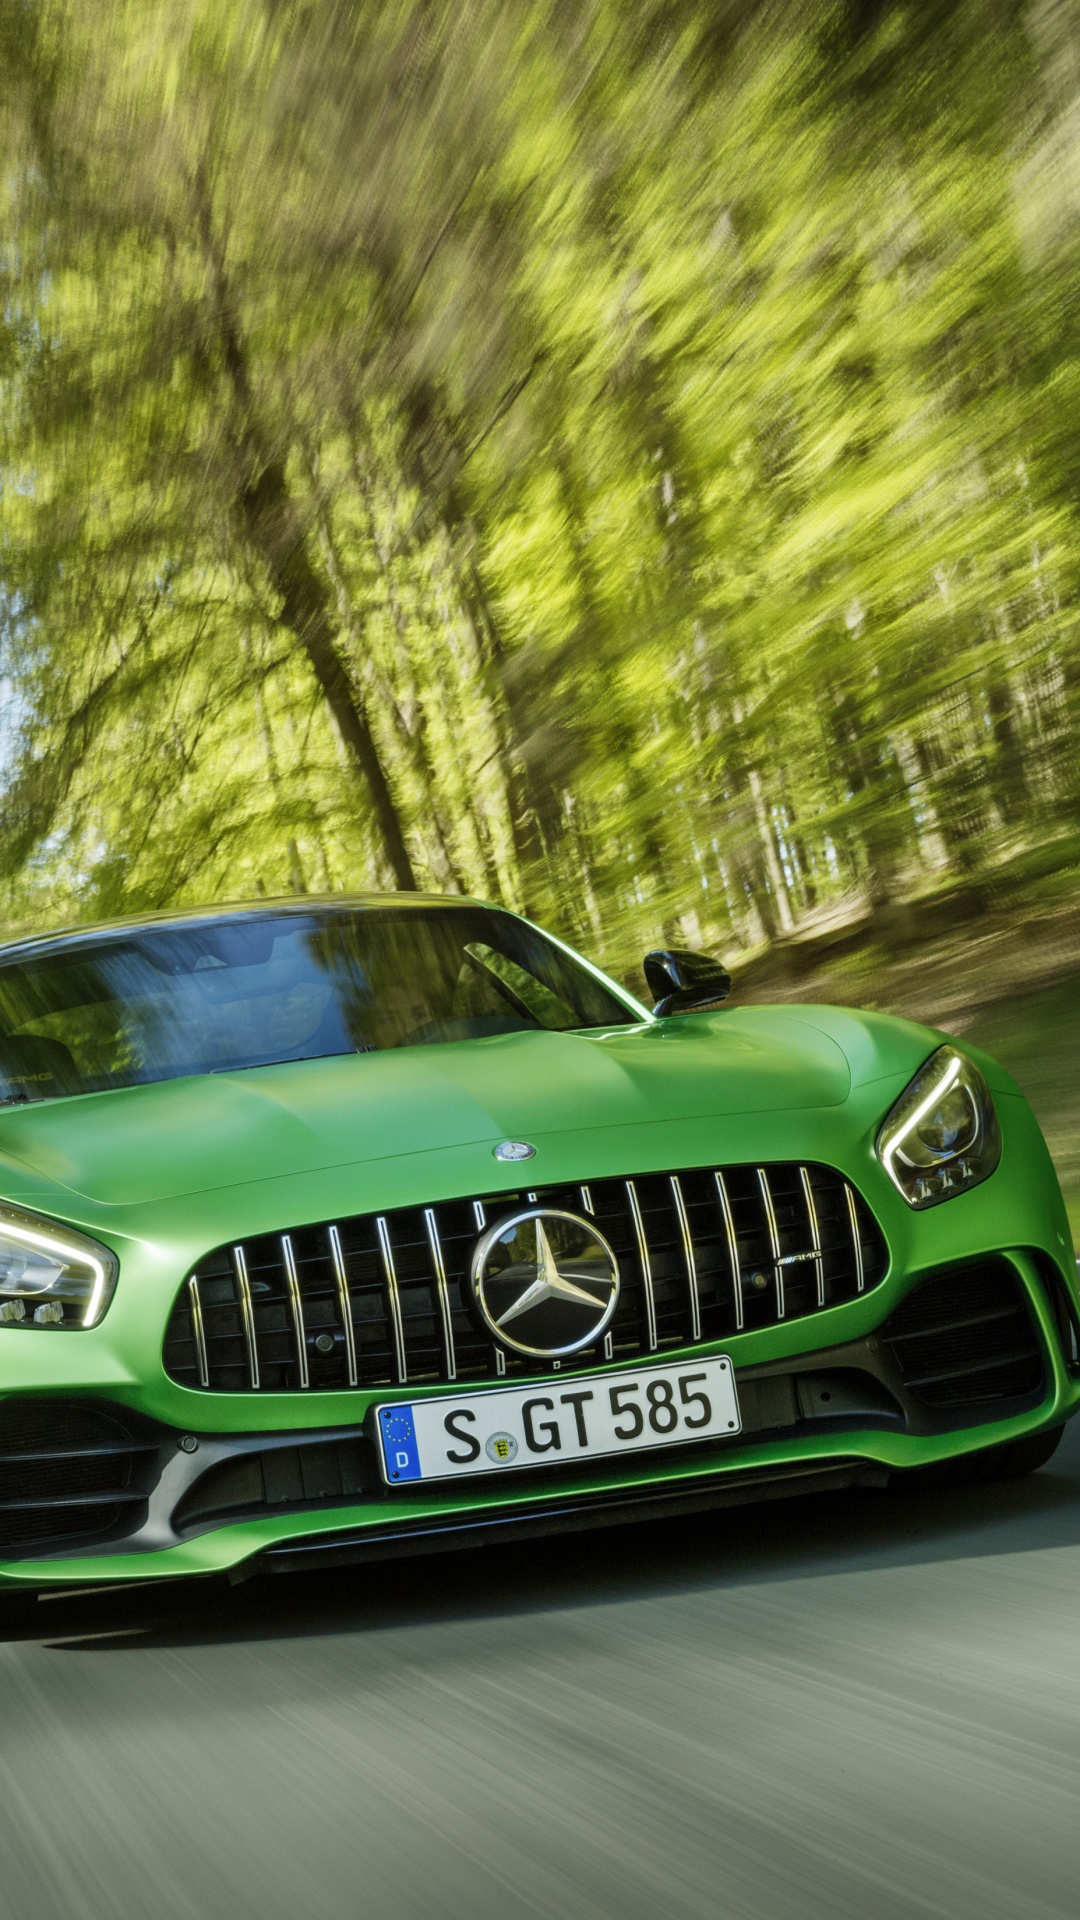 Green Mercedes Benz Car on Road During Daytime. Wallpaper in 1080x1920 Resolution